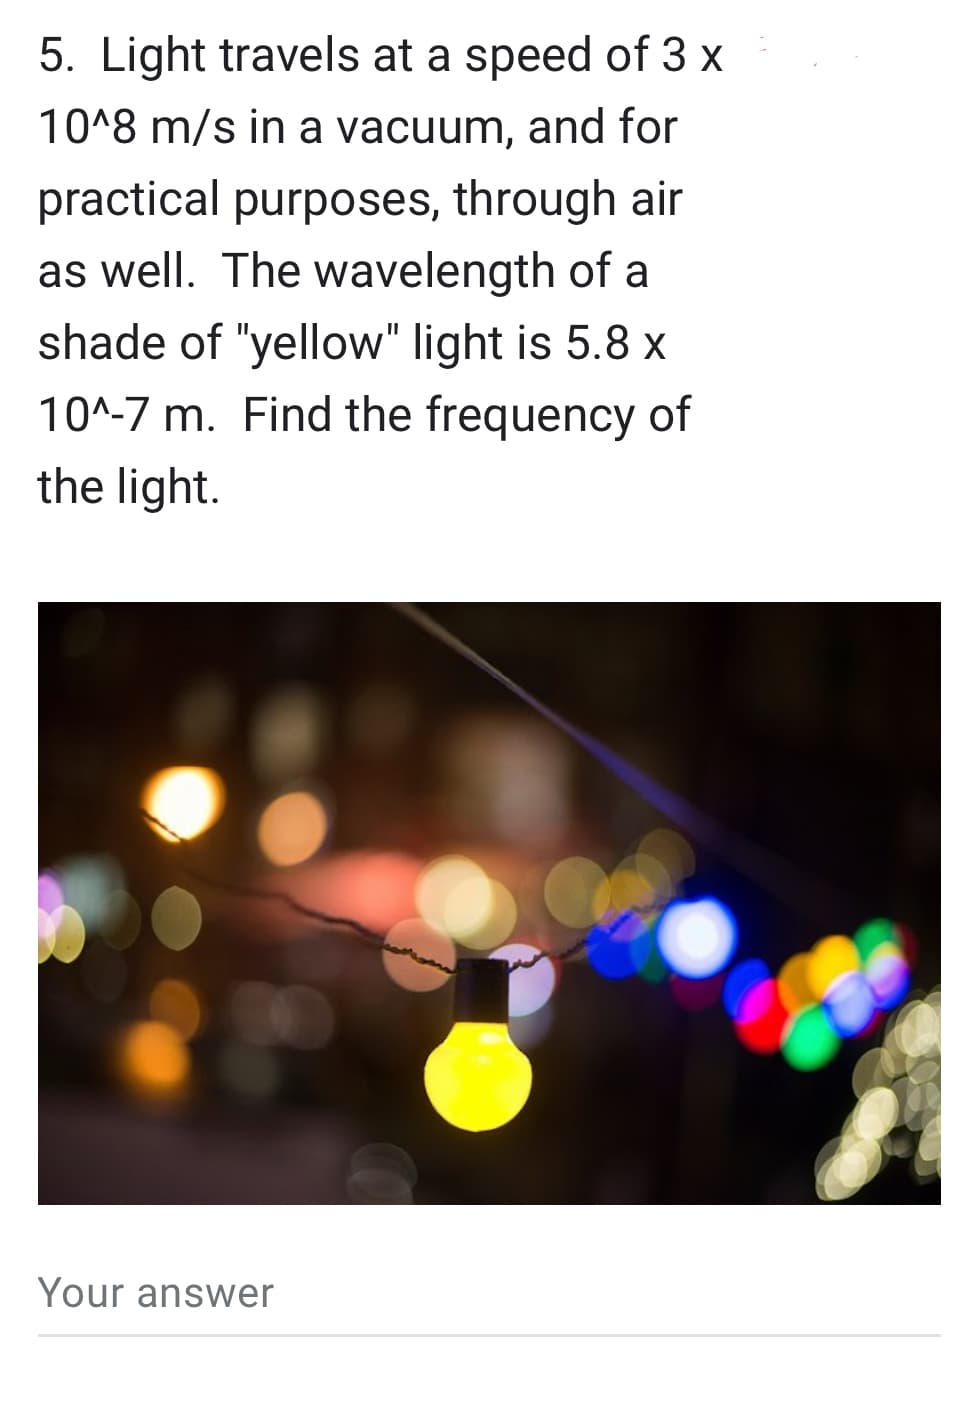 5. Light travels at a speed of 3 x
10^8 m/s in a vacuum, and for
practical purposes, through air
as well. The wavelength of a
shade of "yellow" light is 5.8 x
10^-7 m. Find the frequency of
the light.
Your answer